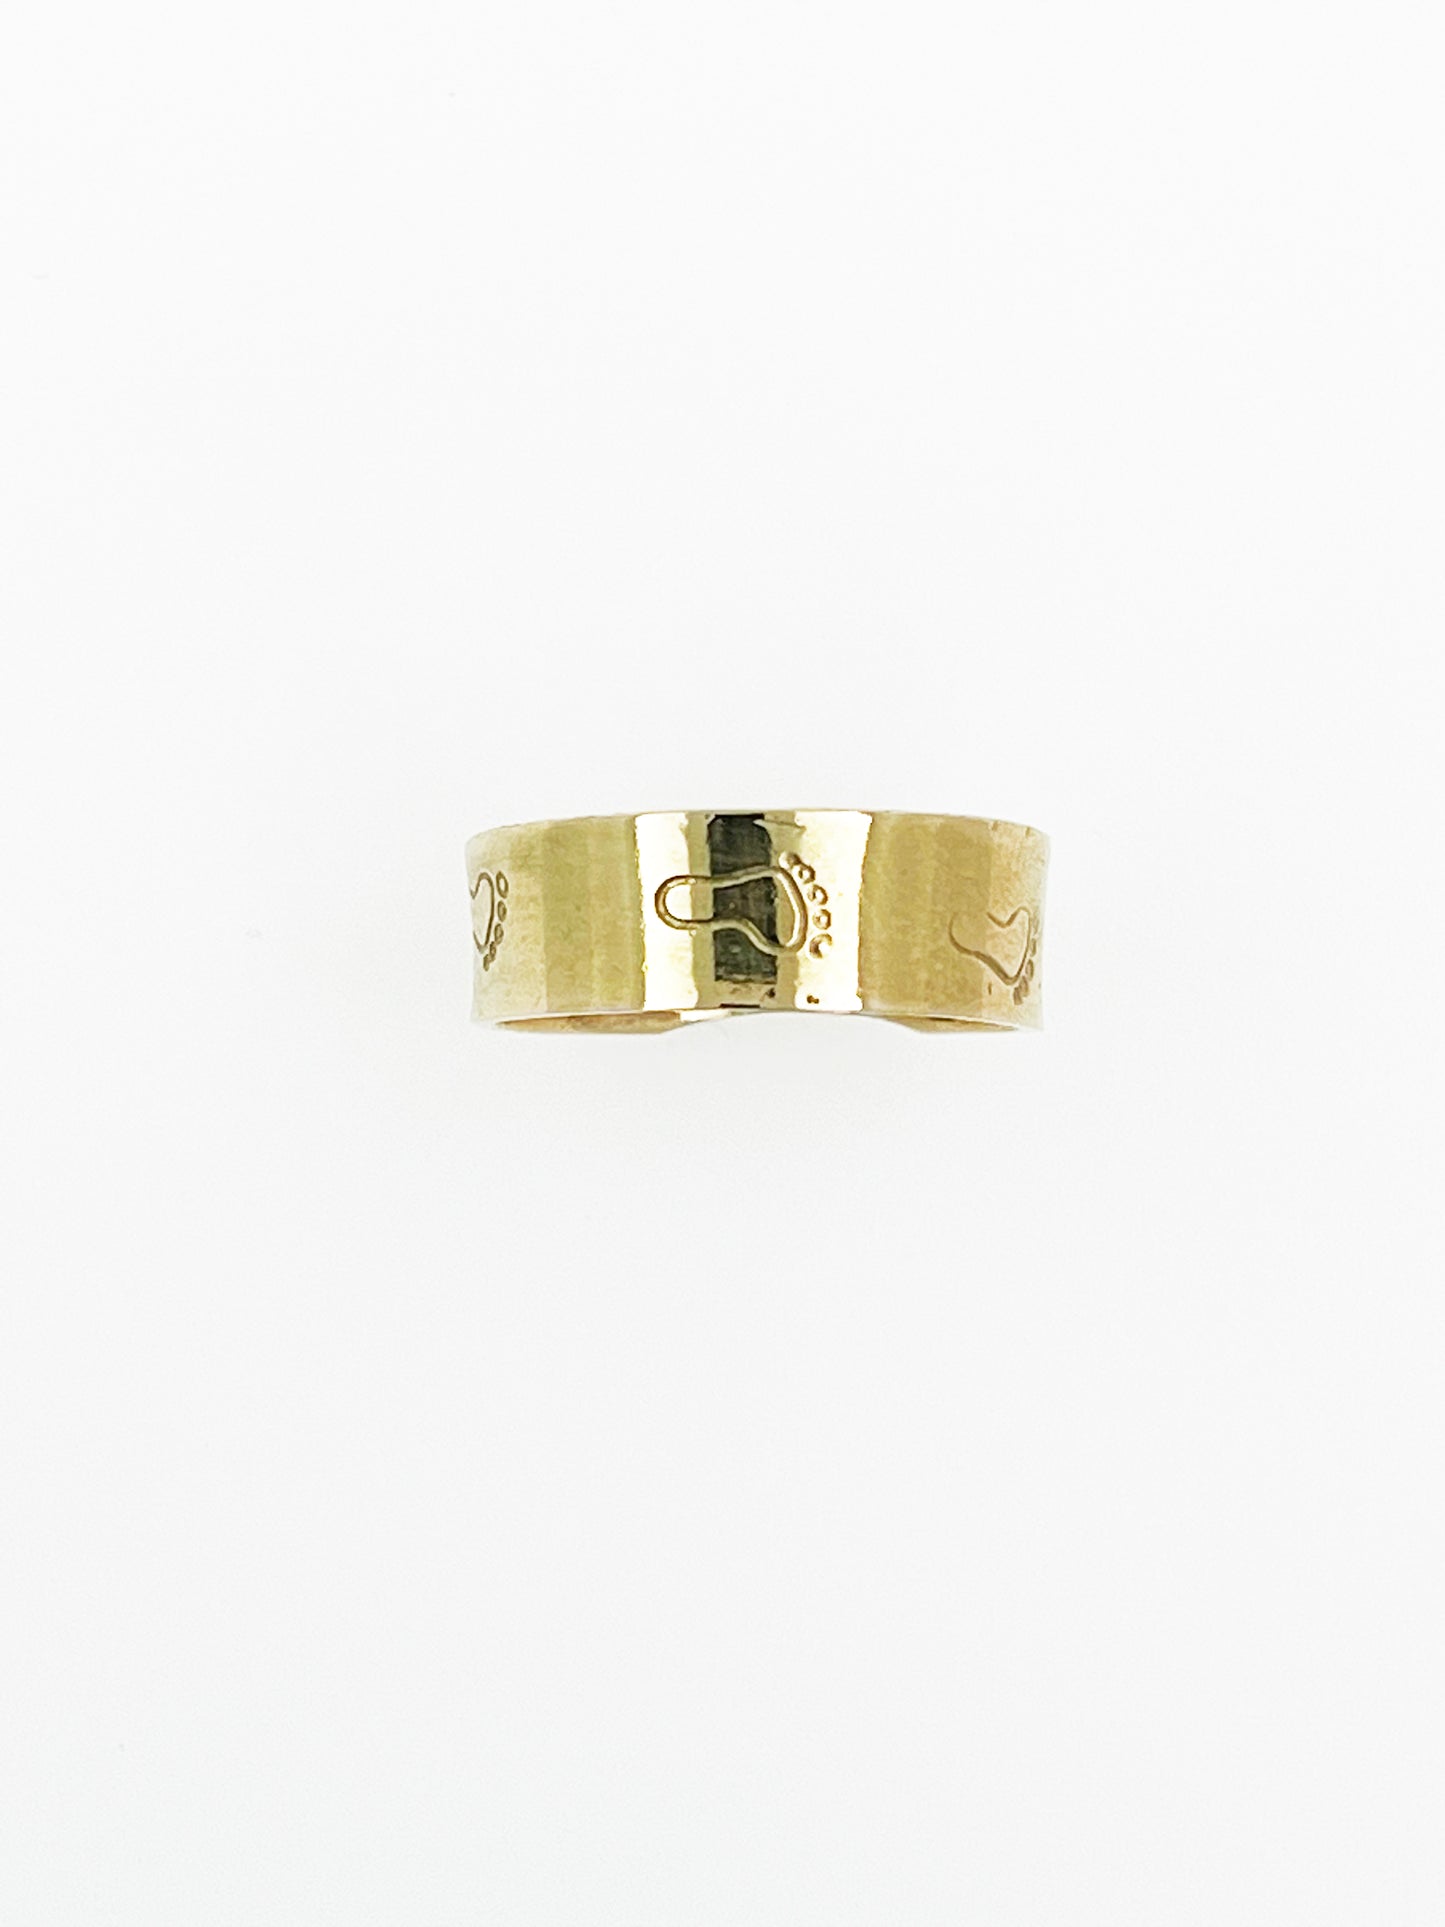 Nomadic Traveler’s Ring in 14k Yellow Gold By Maxwell The Jeweler